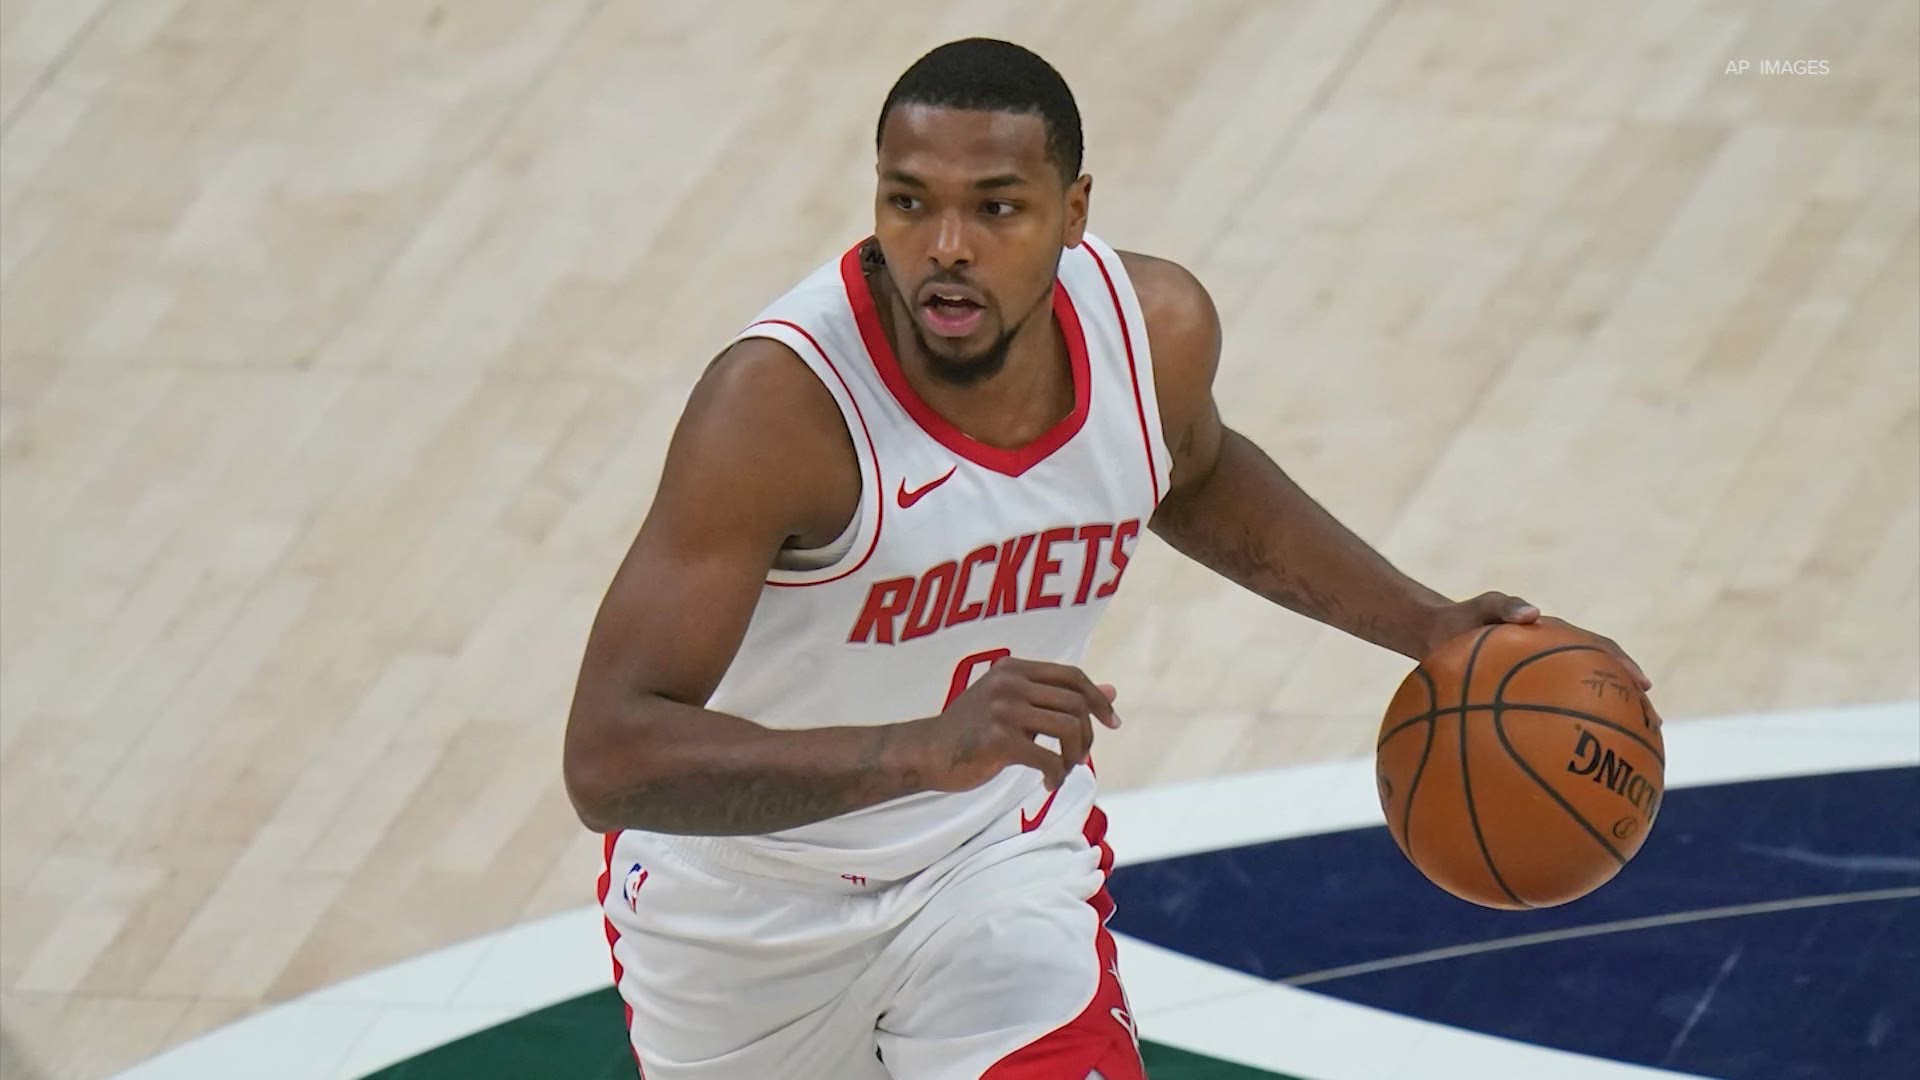 Houston Rockets player Sterling Brown assaulted in Sunday night in Miami, the team confirmed.